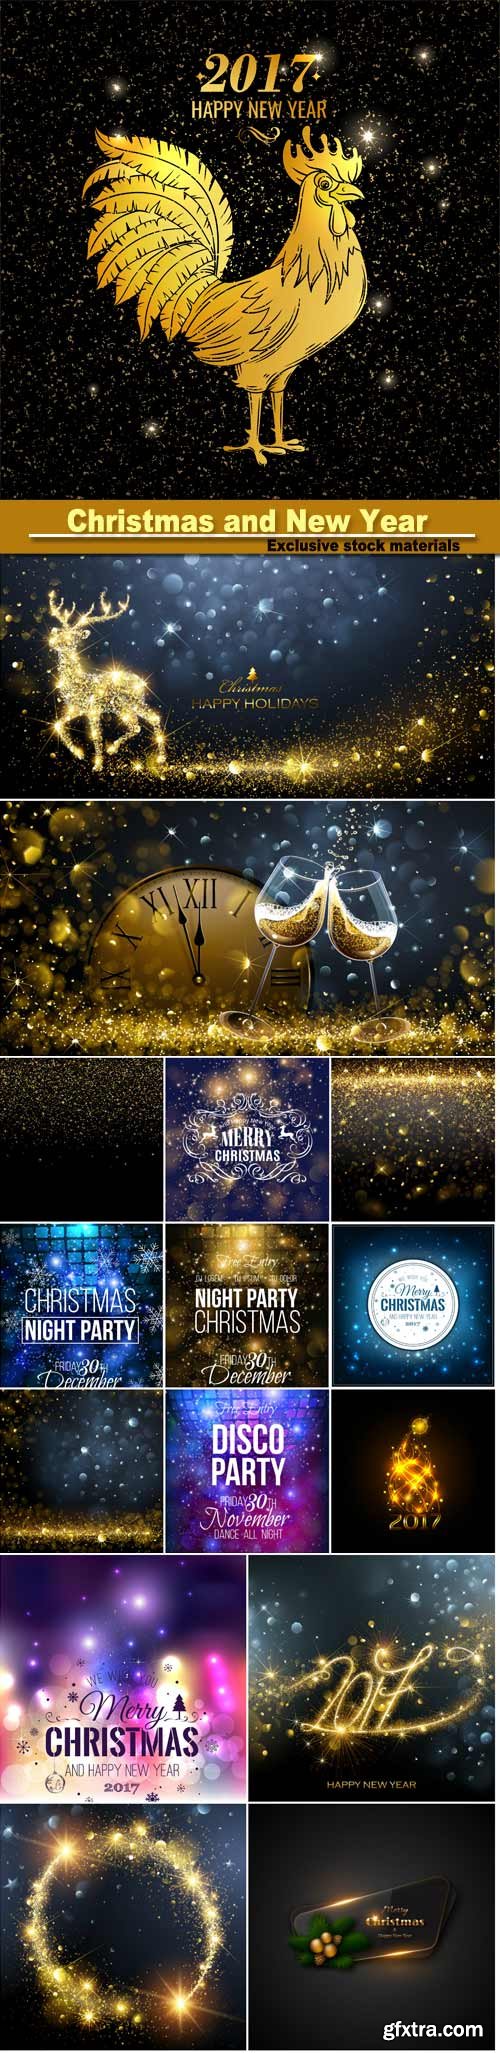 Christmas and New Year background with snowflakes, light, stars, vector illustration